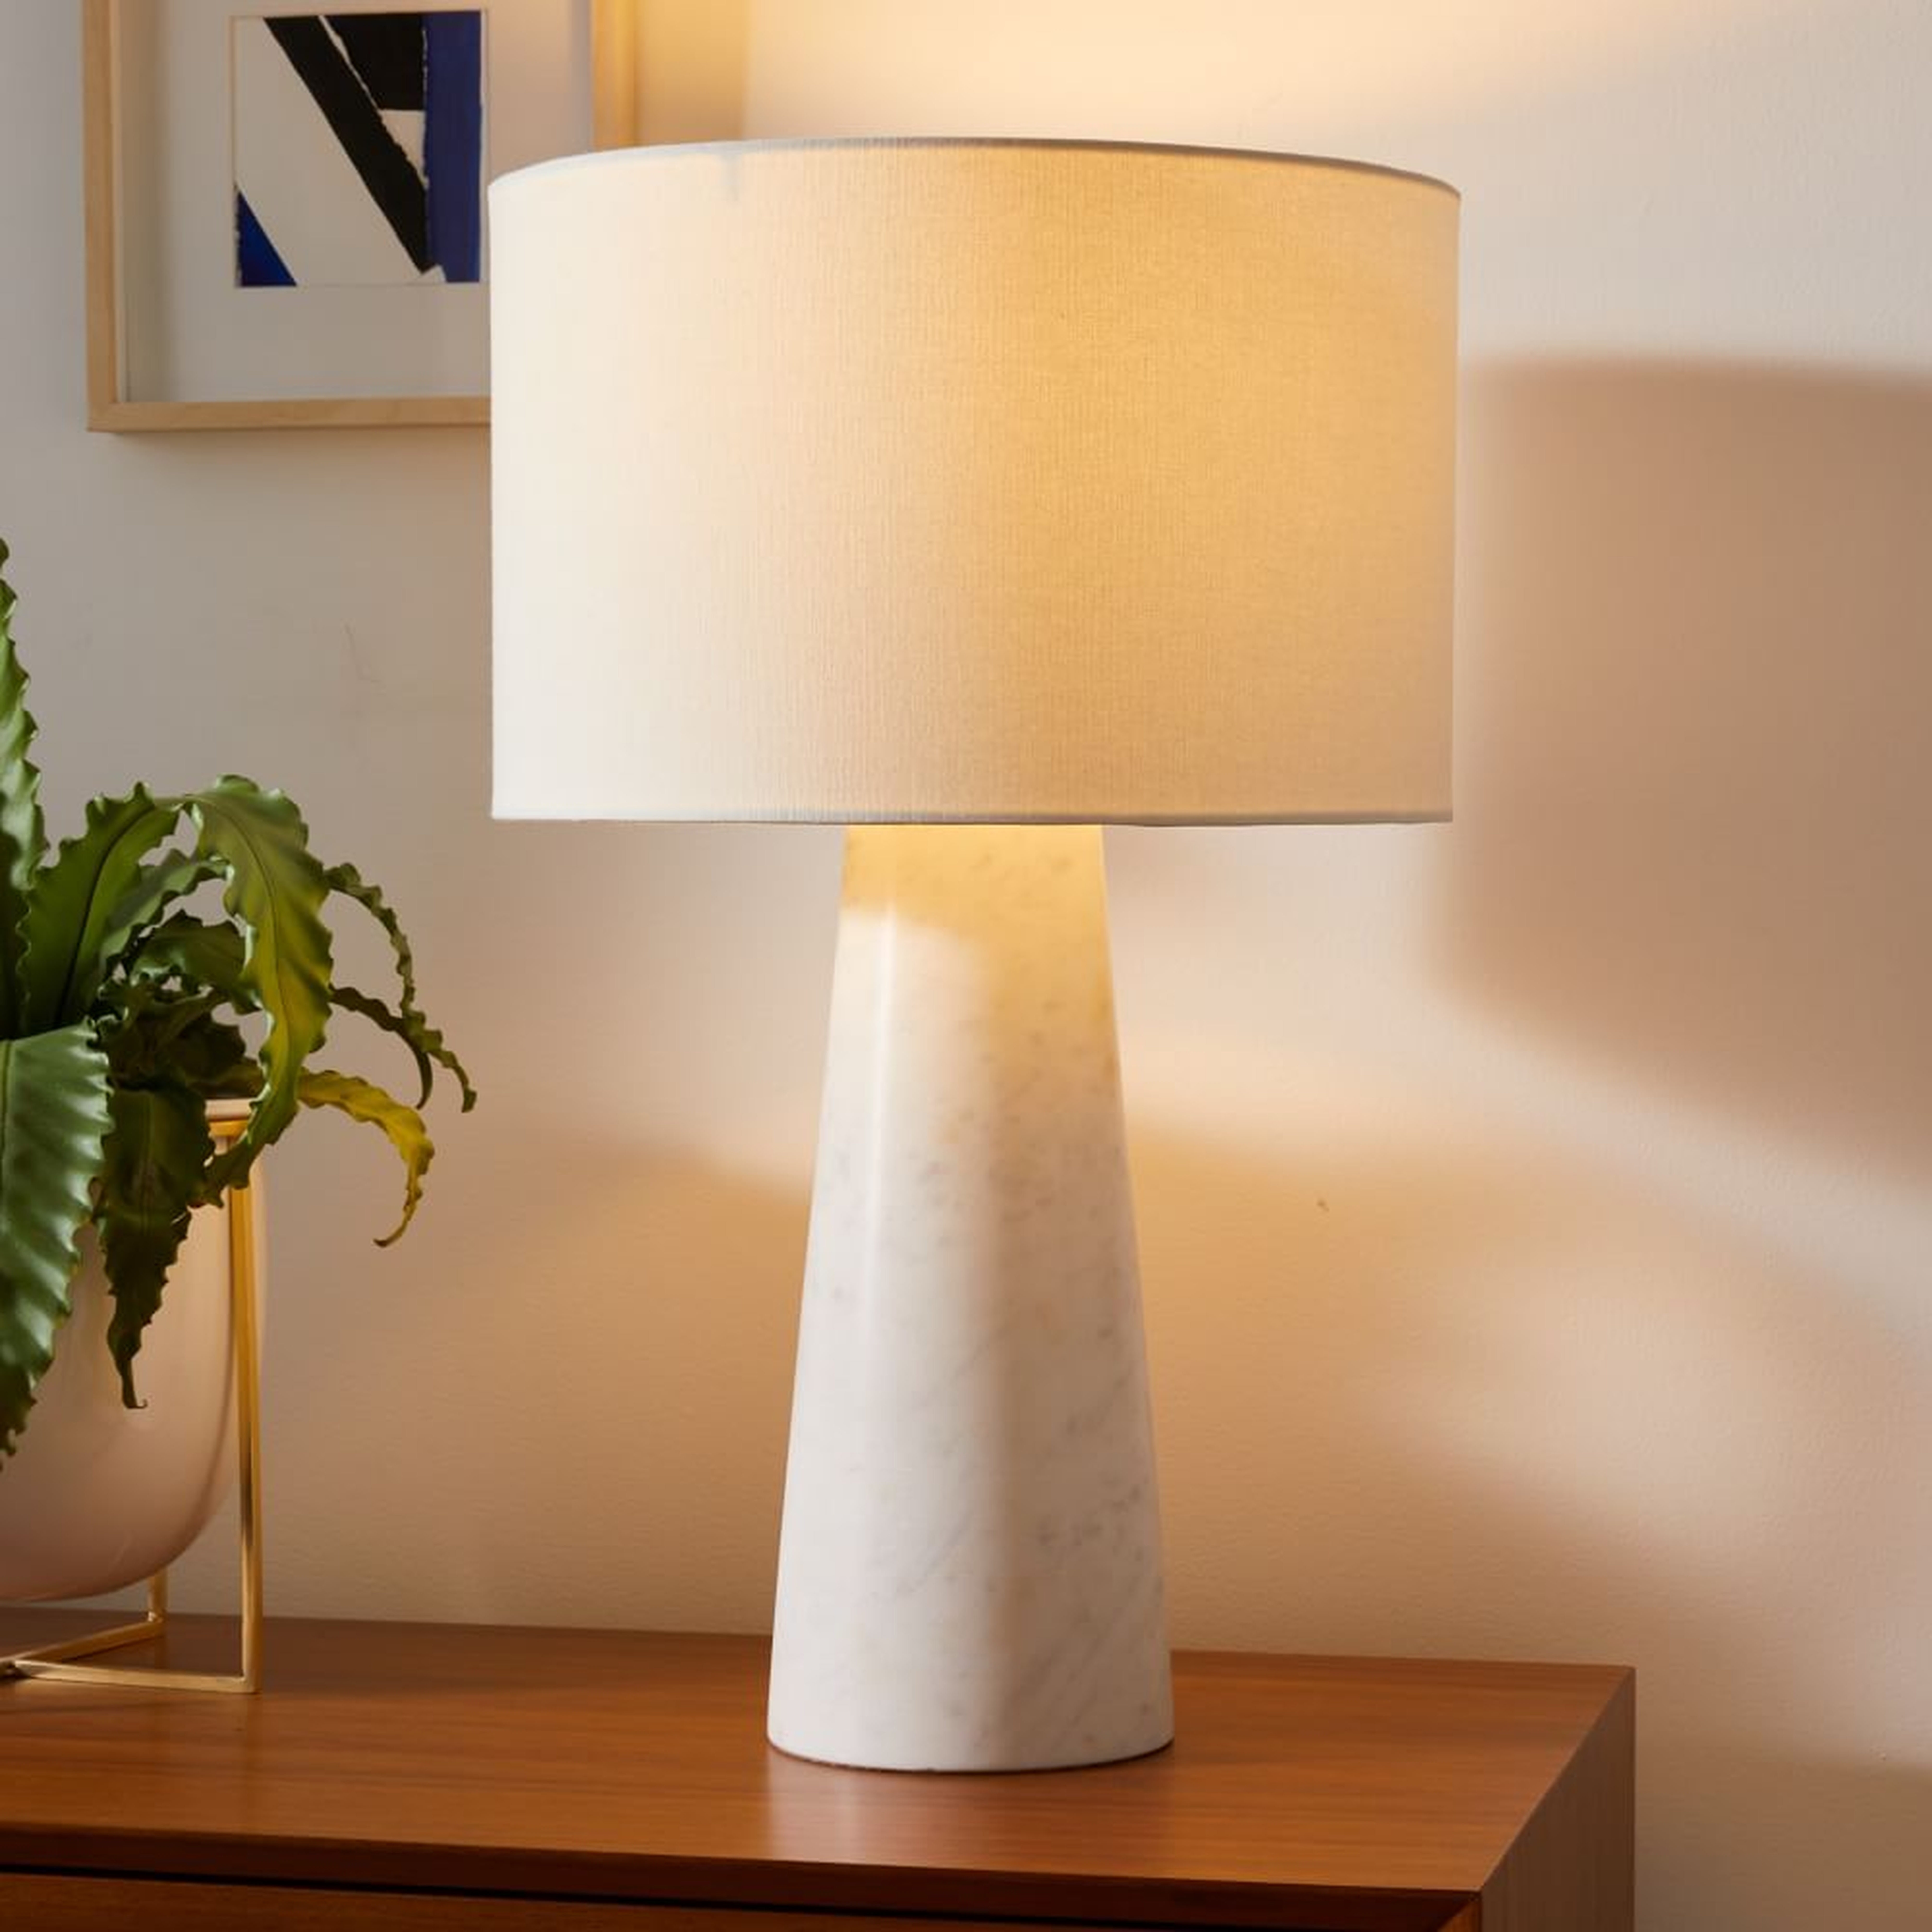 Foundational Marble Table Lamps, 22", White, Set of 2 - West Elm